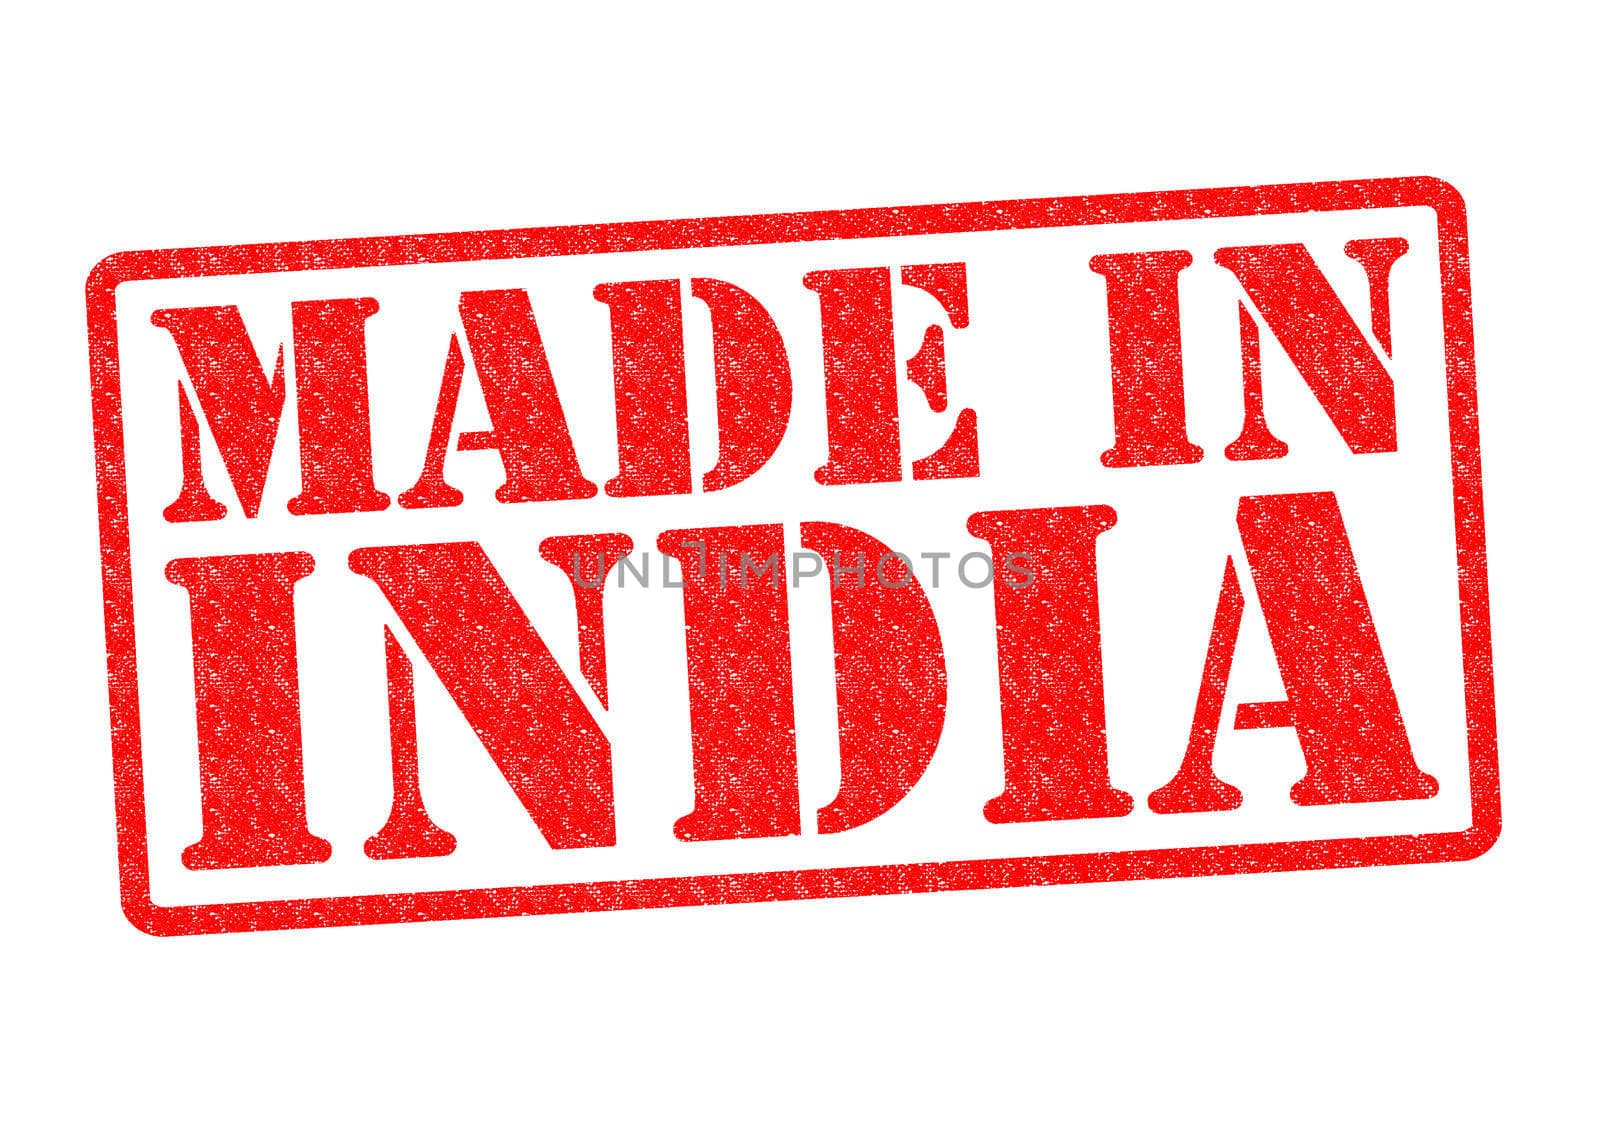 MADE IN INDIA Rubber Stamp over a white background.